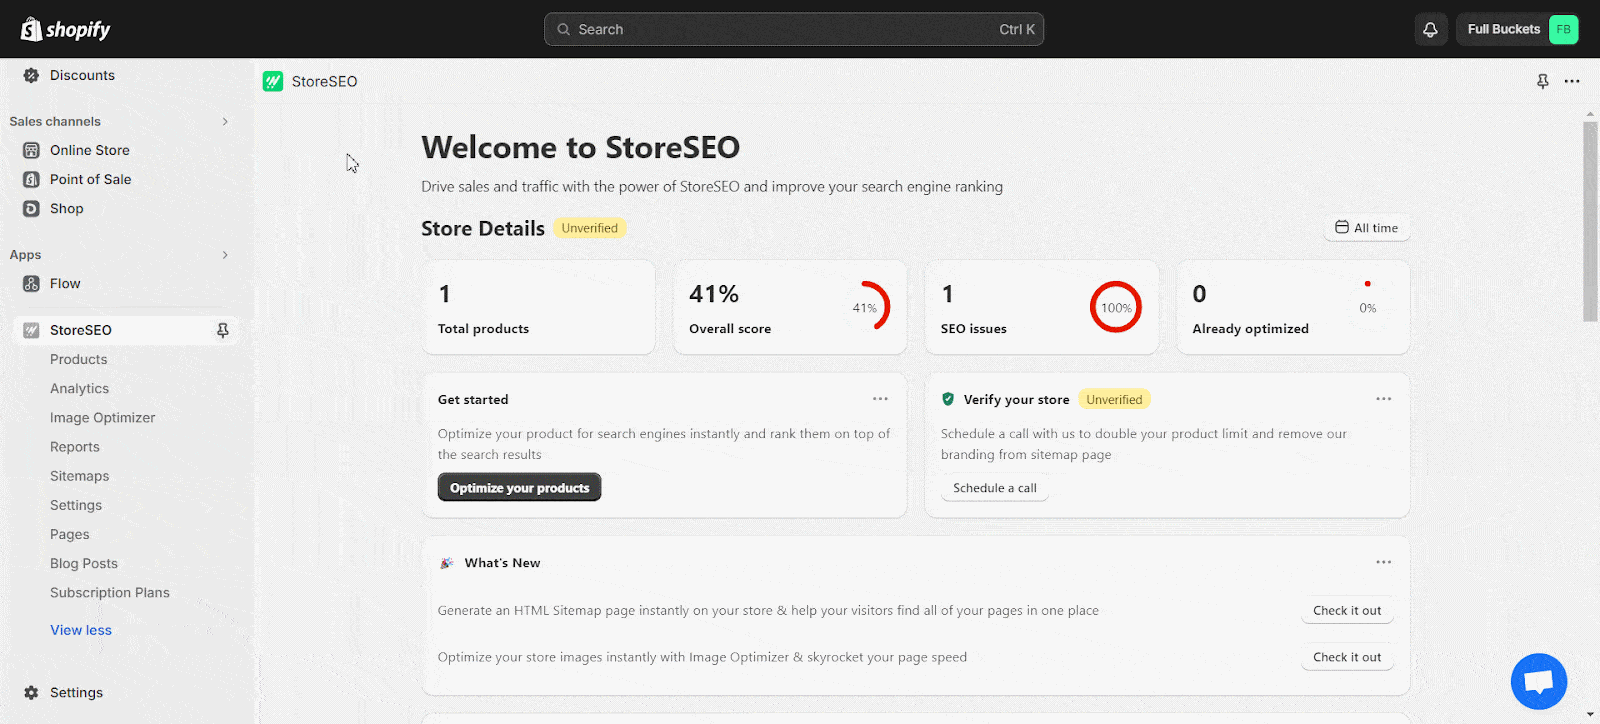 How To Upgrade StoreSEO Plan